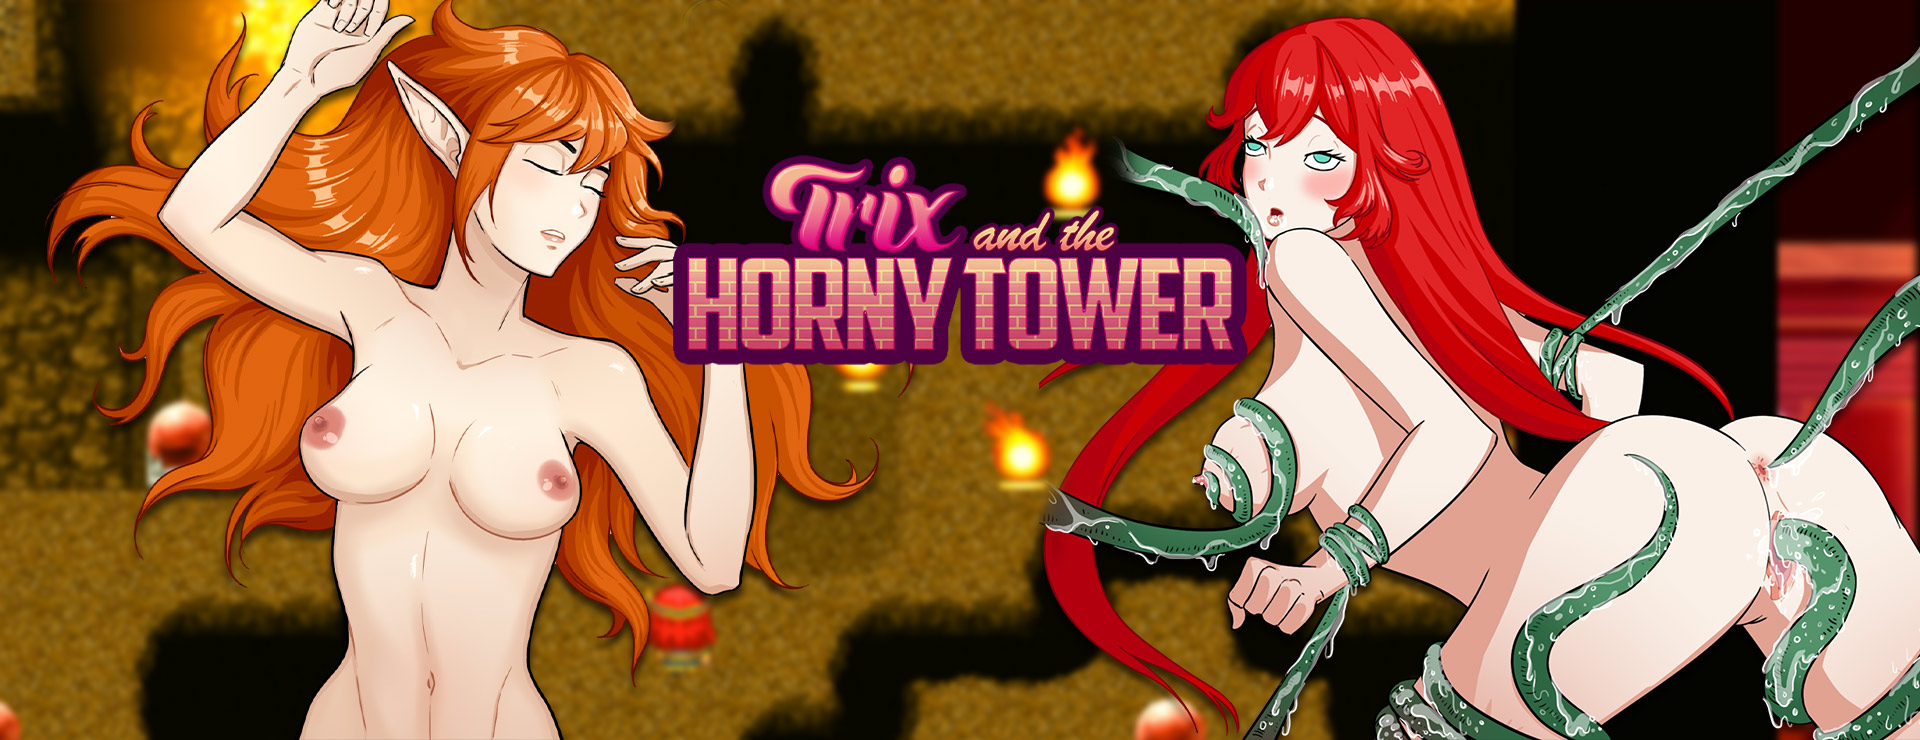 Trix and the Horny Tower - RPG ゲーム